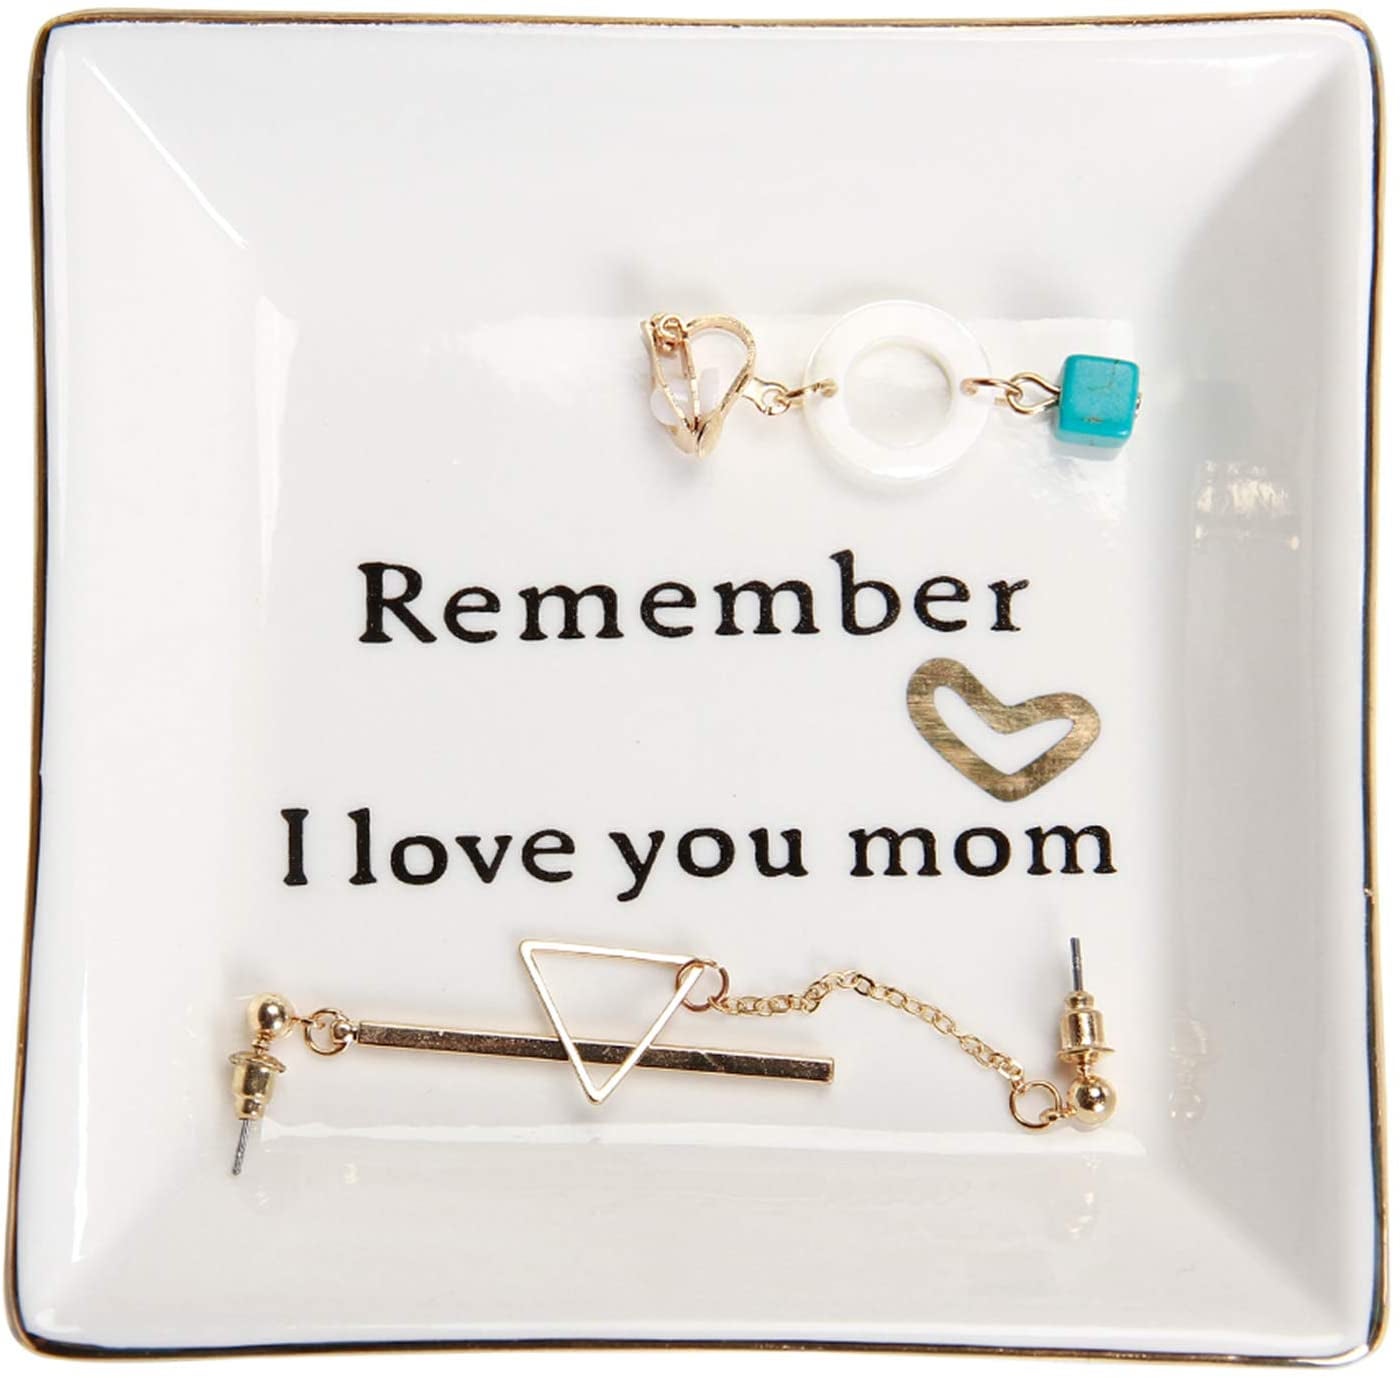 19 Sentimental Mother's Day Gift Ideas From Daughter